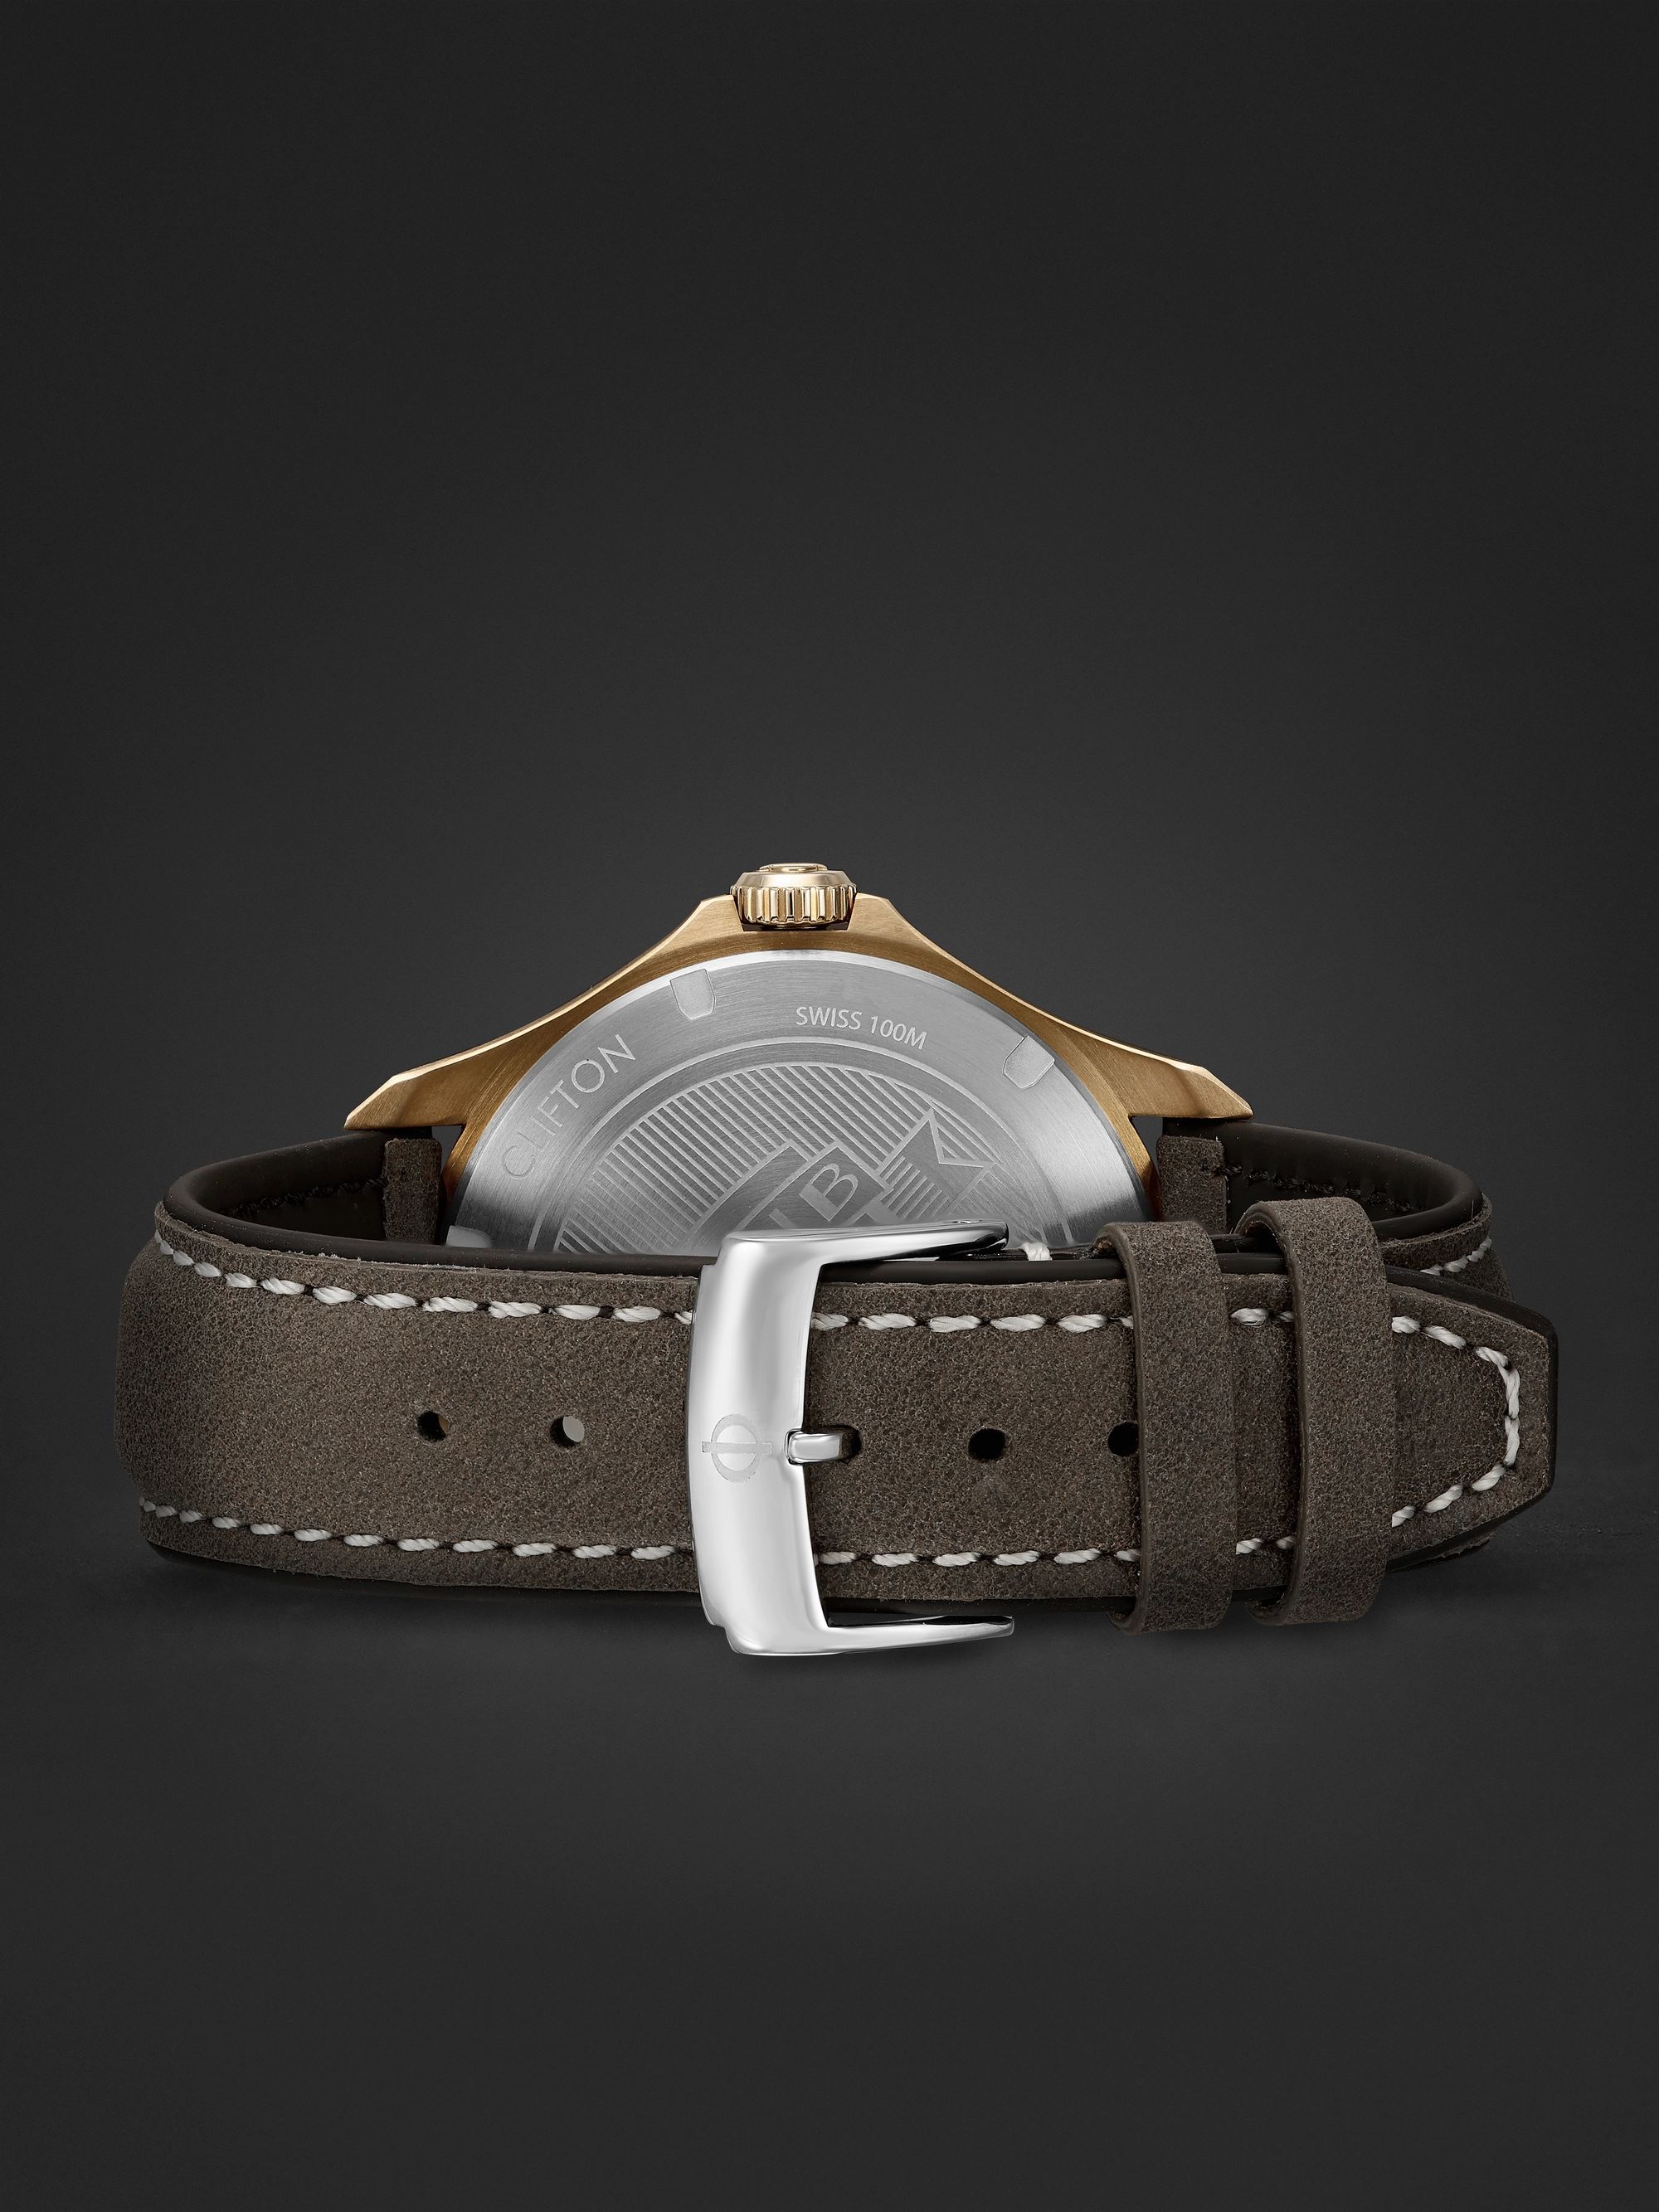 BAUME & MERCIER Clifton Club Automatic 42mm Bronze and Leather Watch, Ref. No. M0A10565